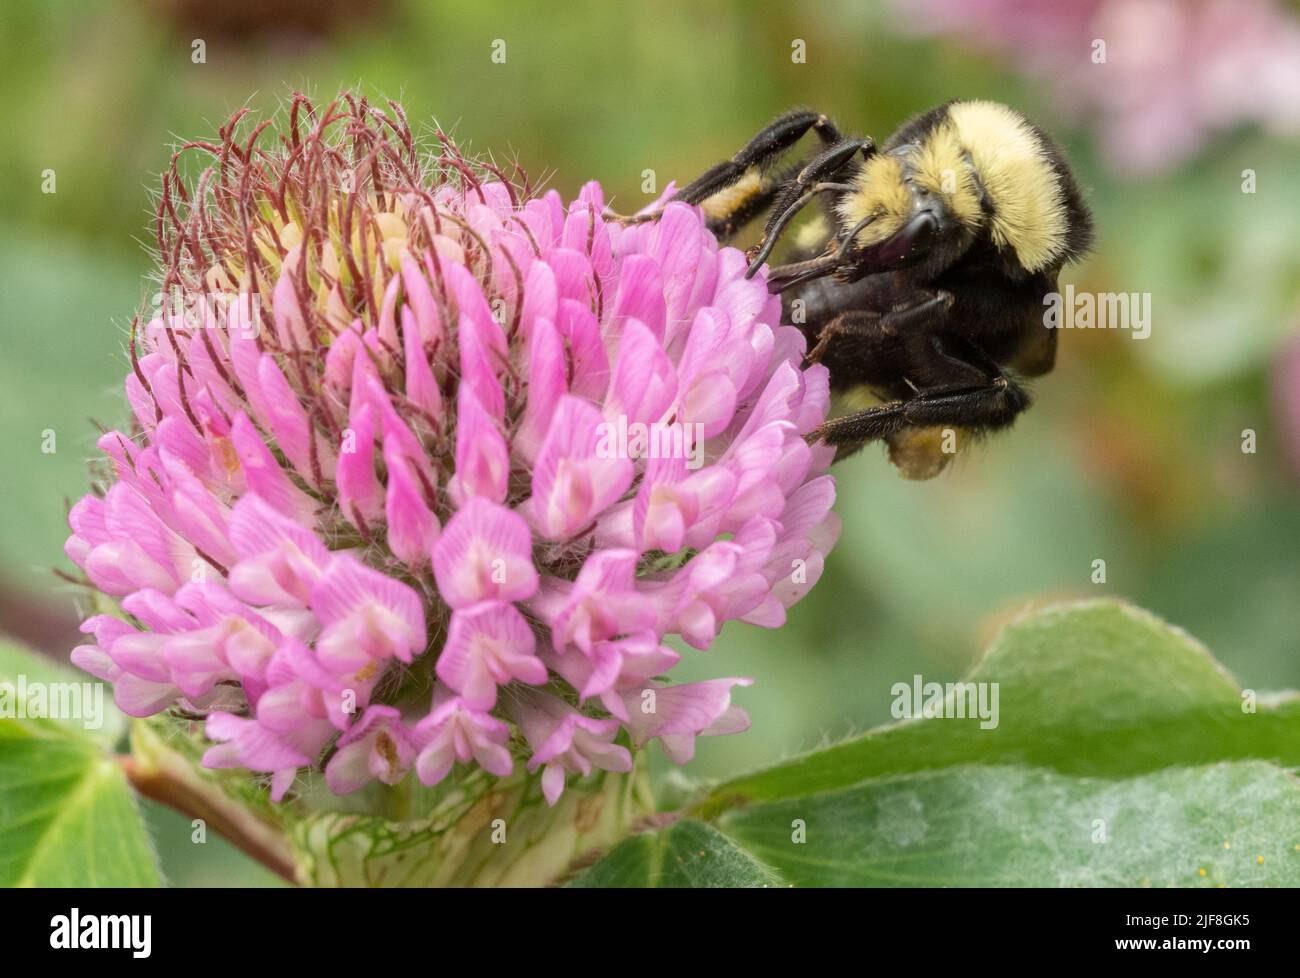 Yellow-faced Bumble bee (Bombus vosnesenskii) on red clover flower Stock Photo